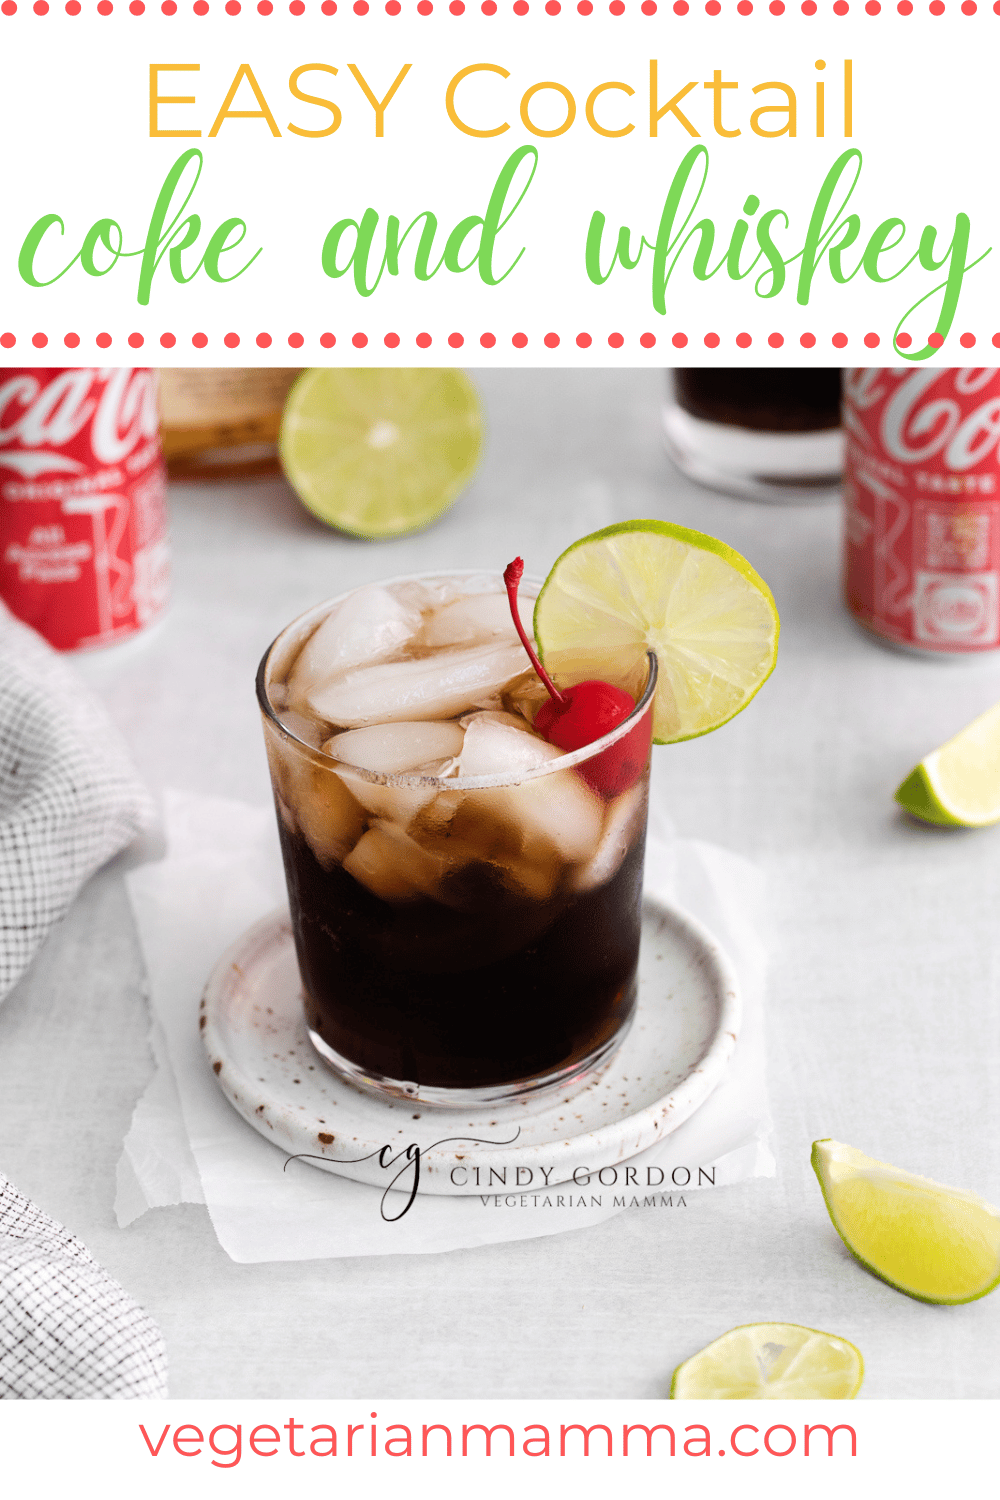 When it comes to cocktails, it doesn’t get more classic or more simple than this two-ingredient Coke and Whiskey! It’s sweet, bubbly, and with just a bit of spice.